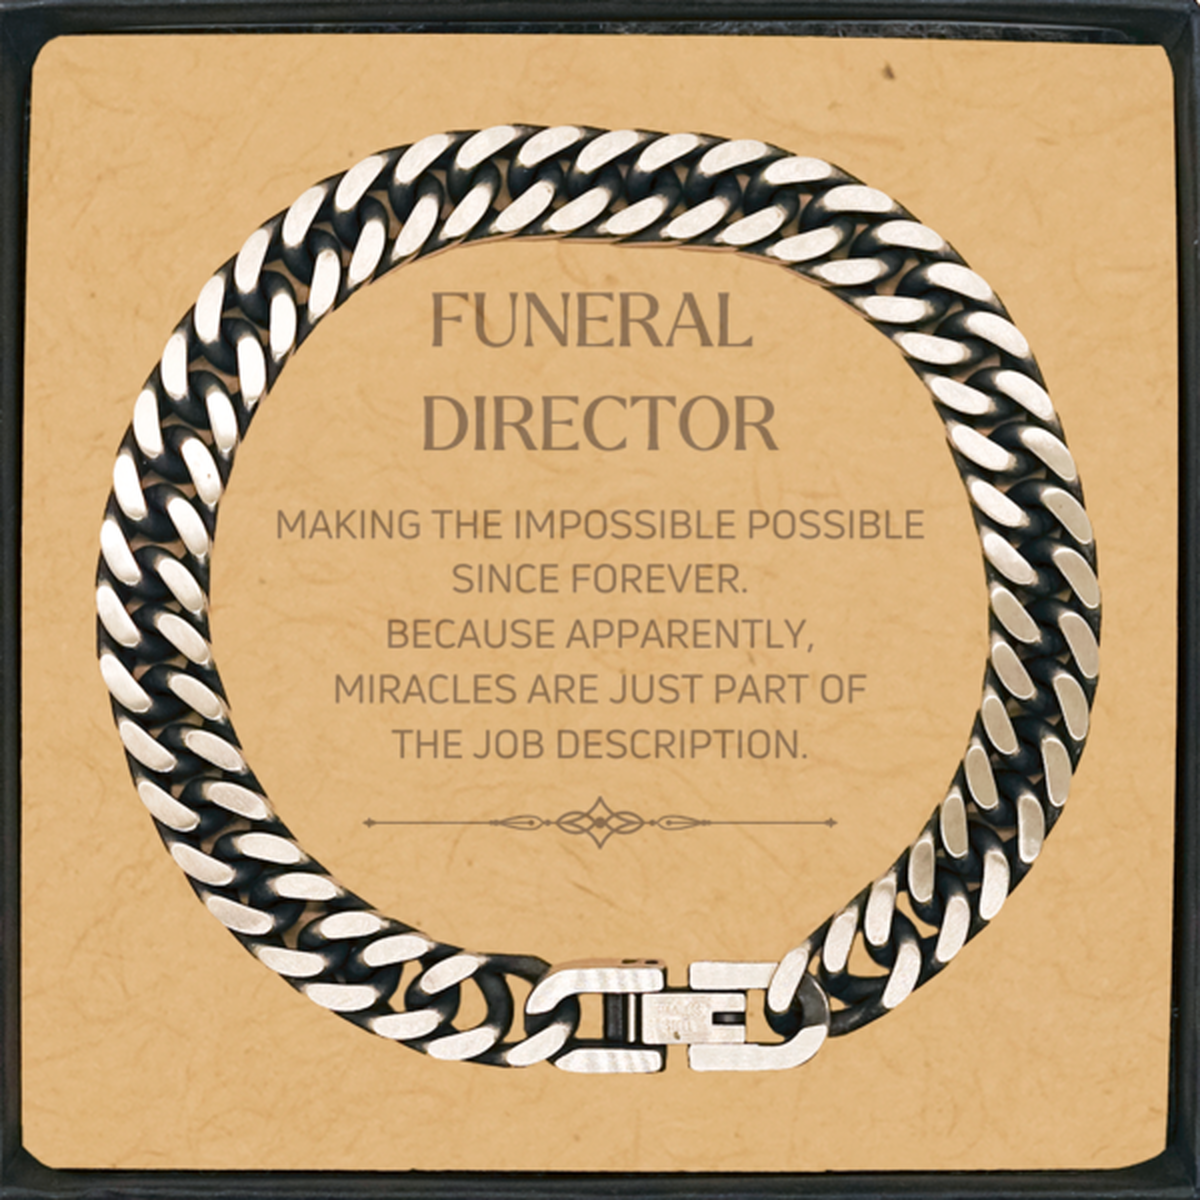 Funny Funeral Director Gifts, Miracles are just part of the job description, Inspirational Birthday Cuban Link Chain Bracelet For Funeral Director, Men, Women, Coworkers, Friends, Boss